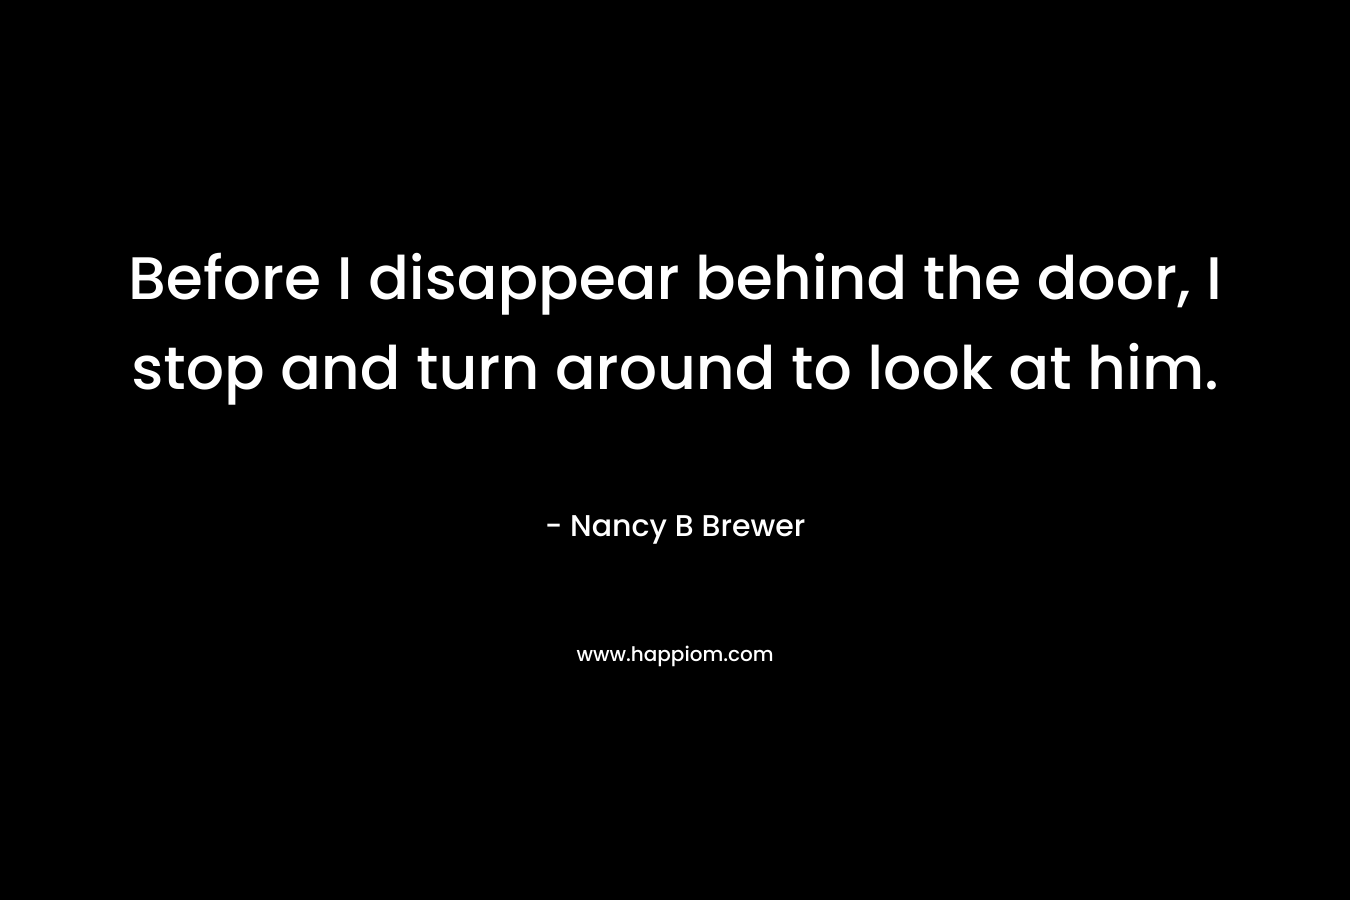 Before I disappear behind the door, I stop and turn around to look at him. – Nancy B Brewer